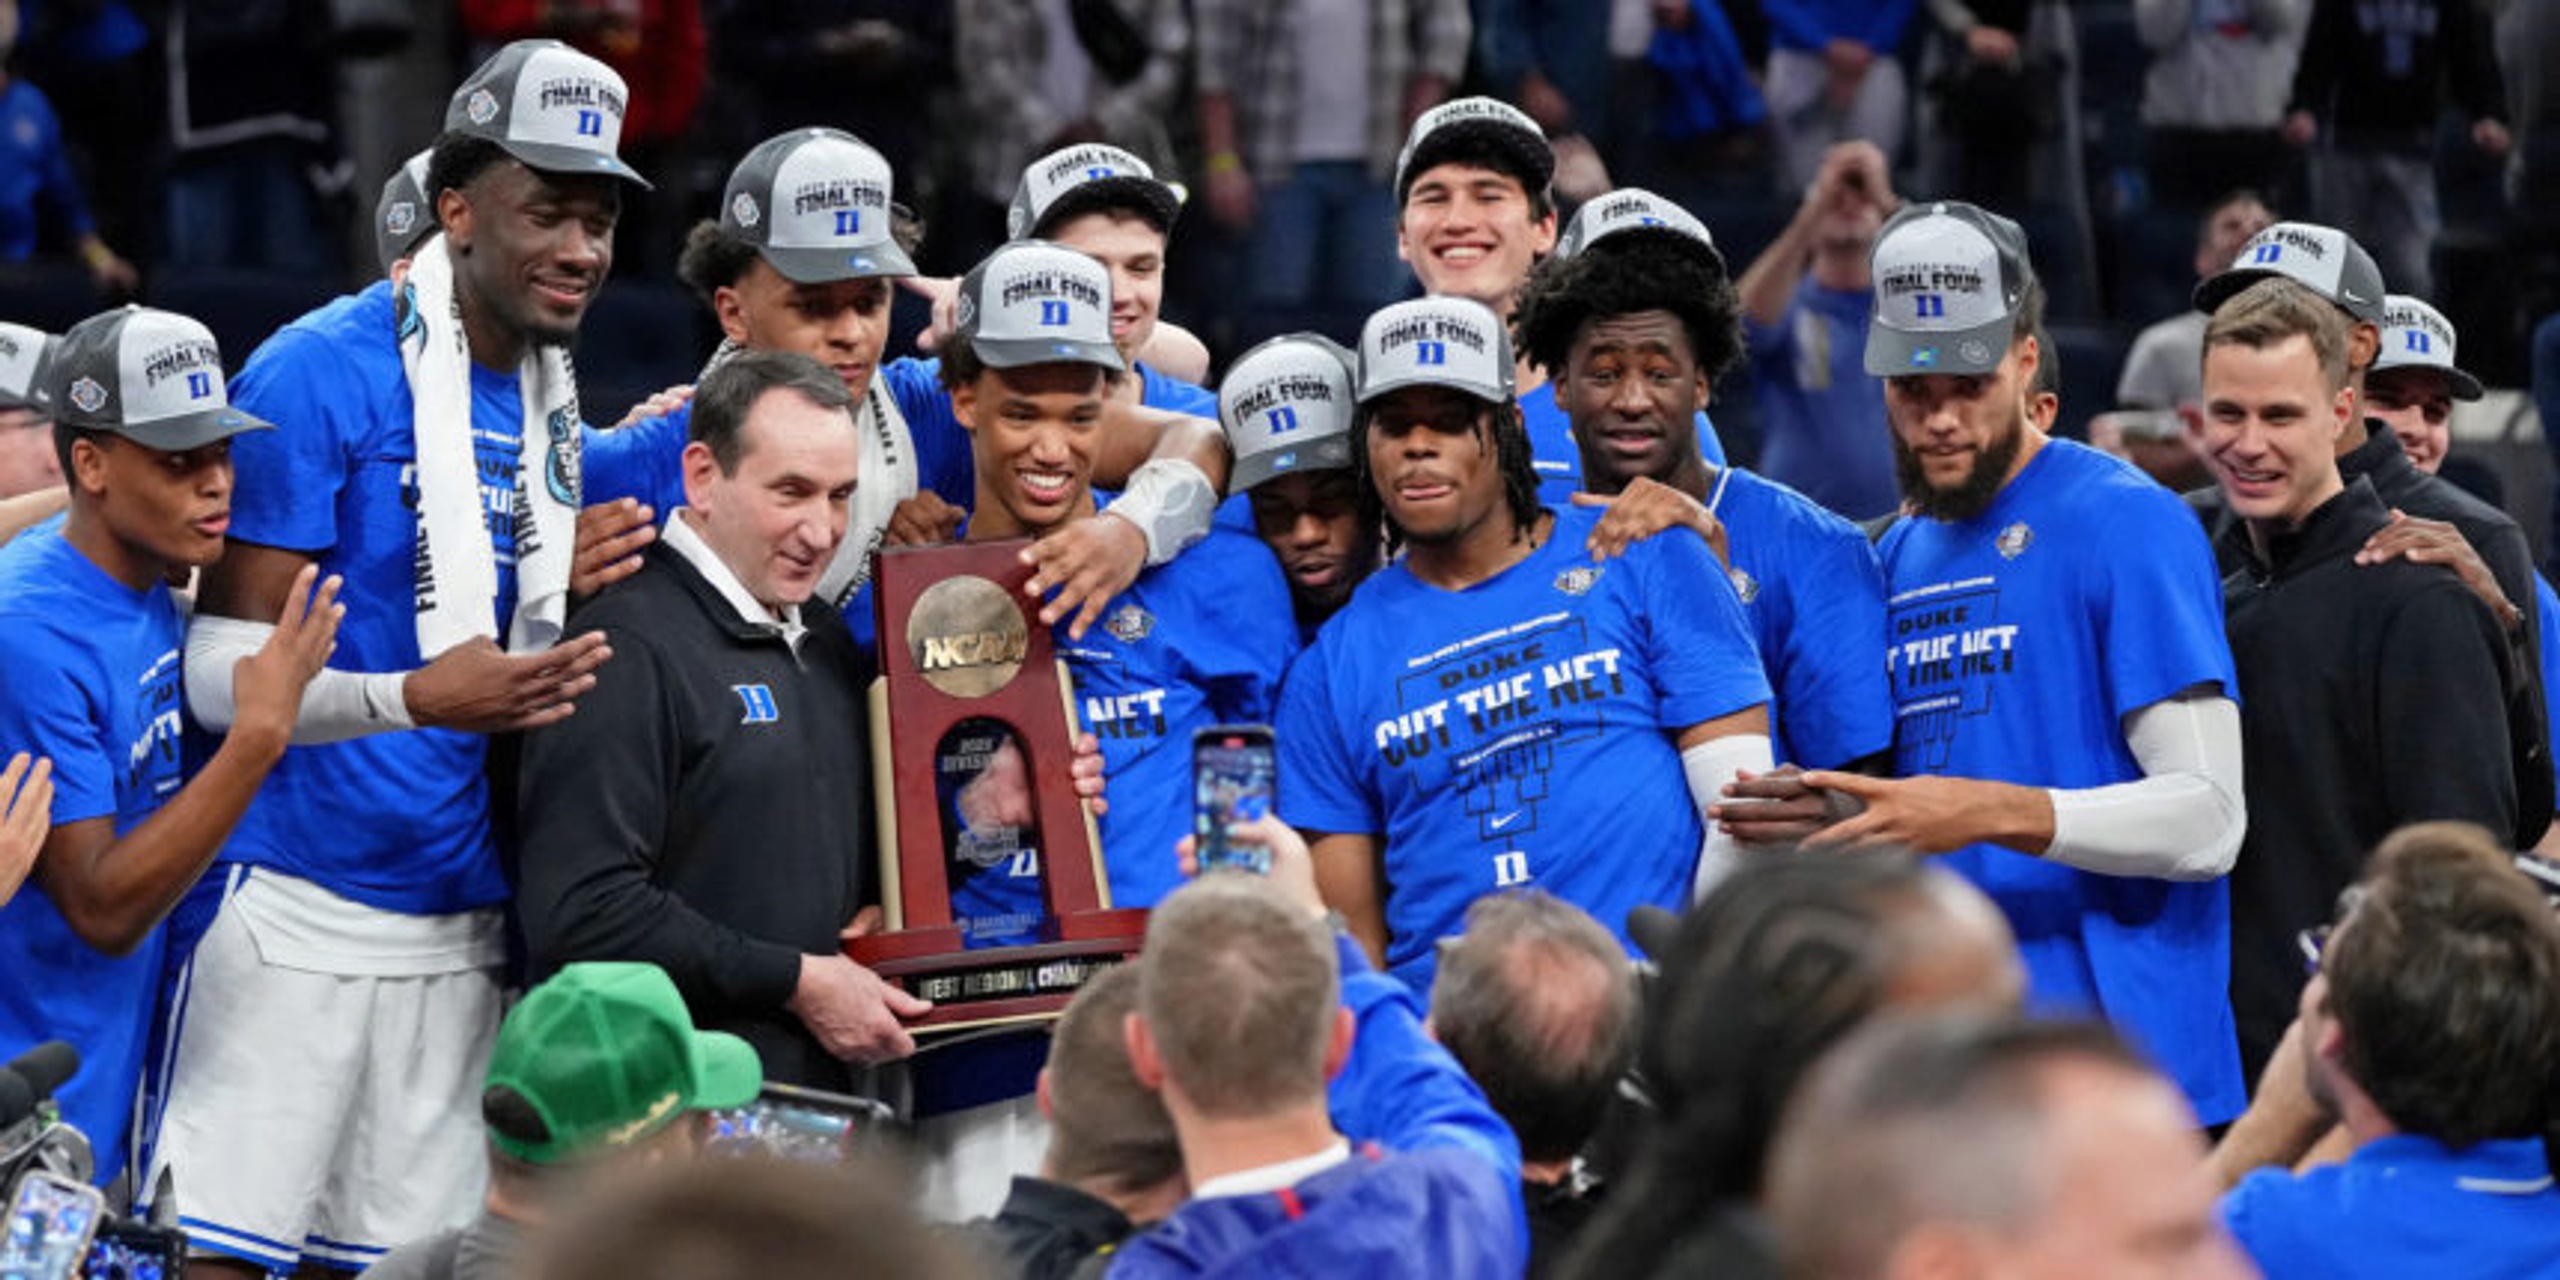 March Madness: Final Four has a blue tint with power programs